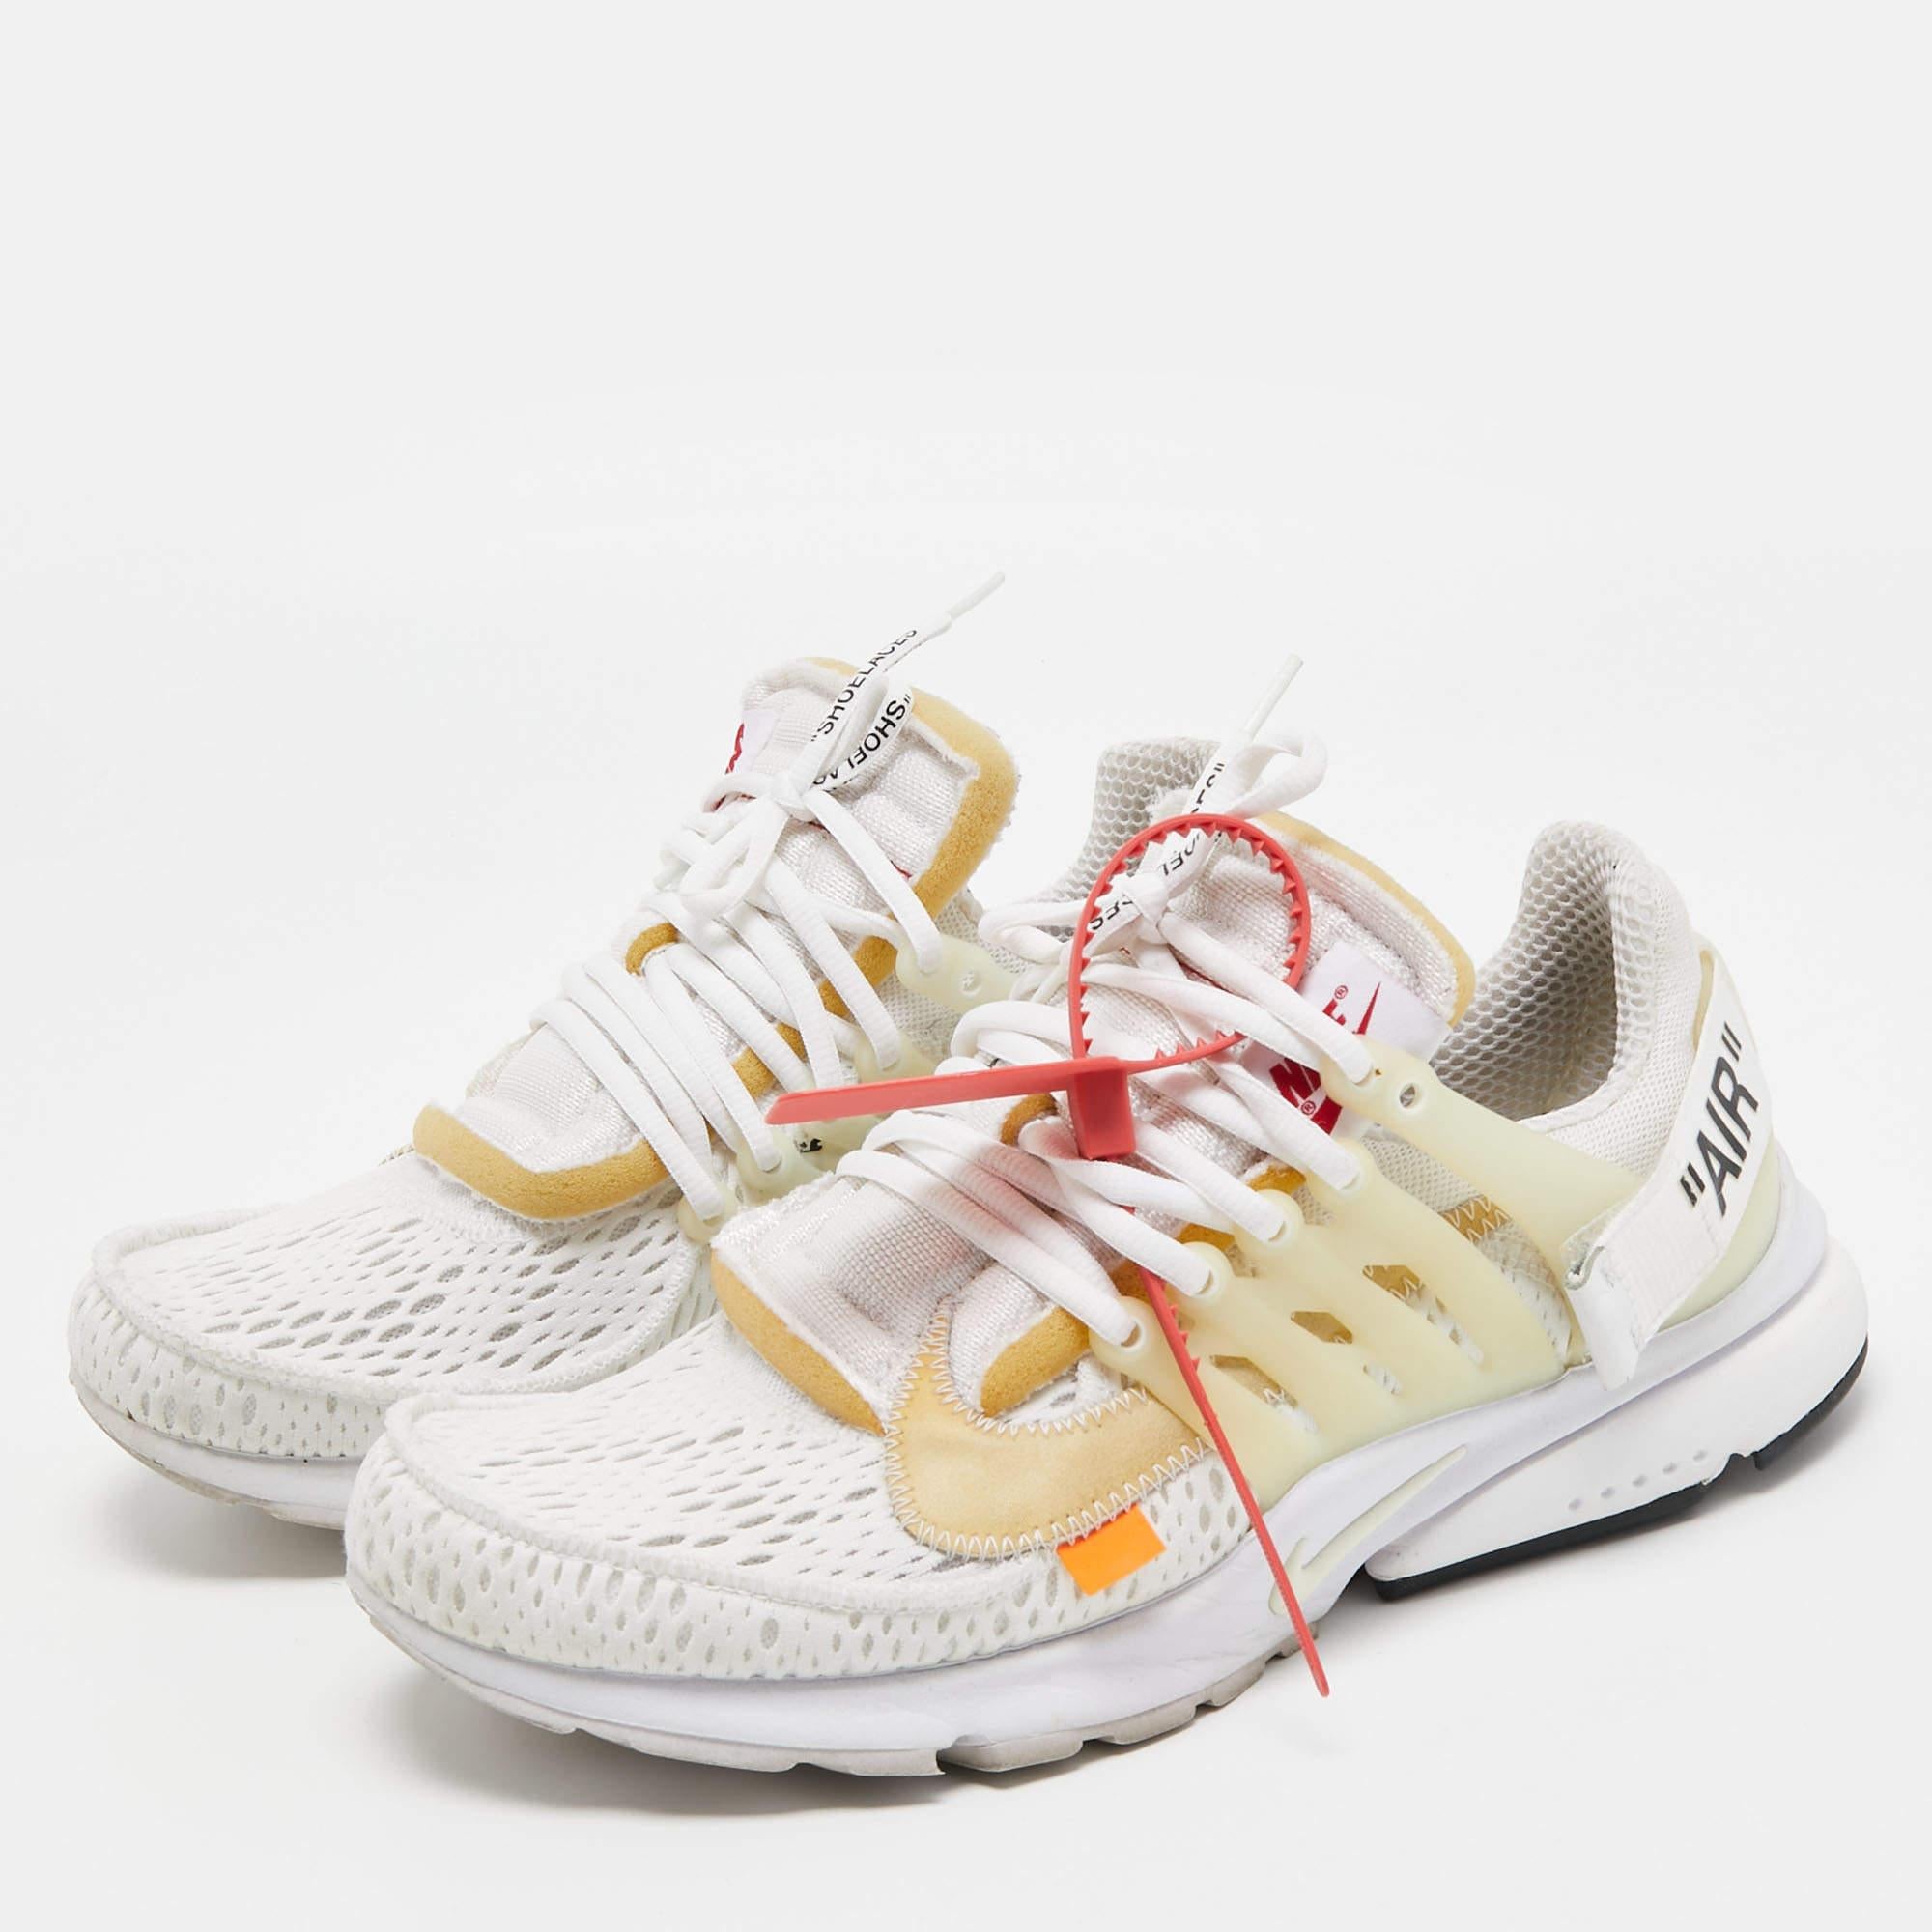 Nike x Off White White Fabric Air Presto Low Trainers Sneakers Size 42.5 2